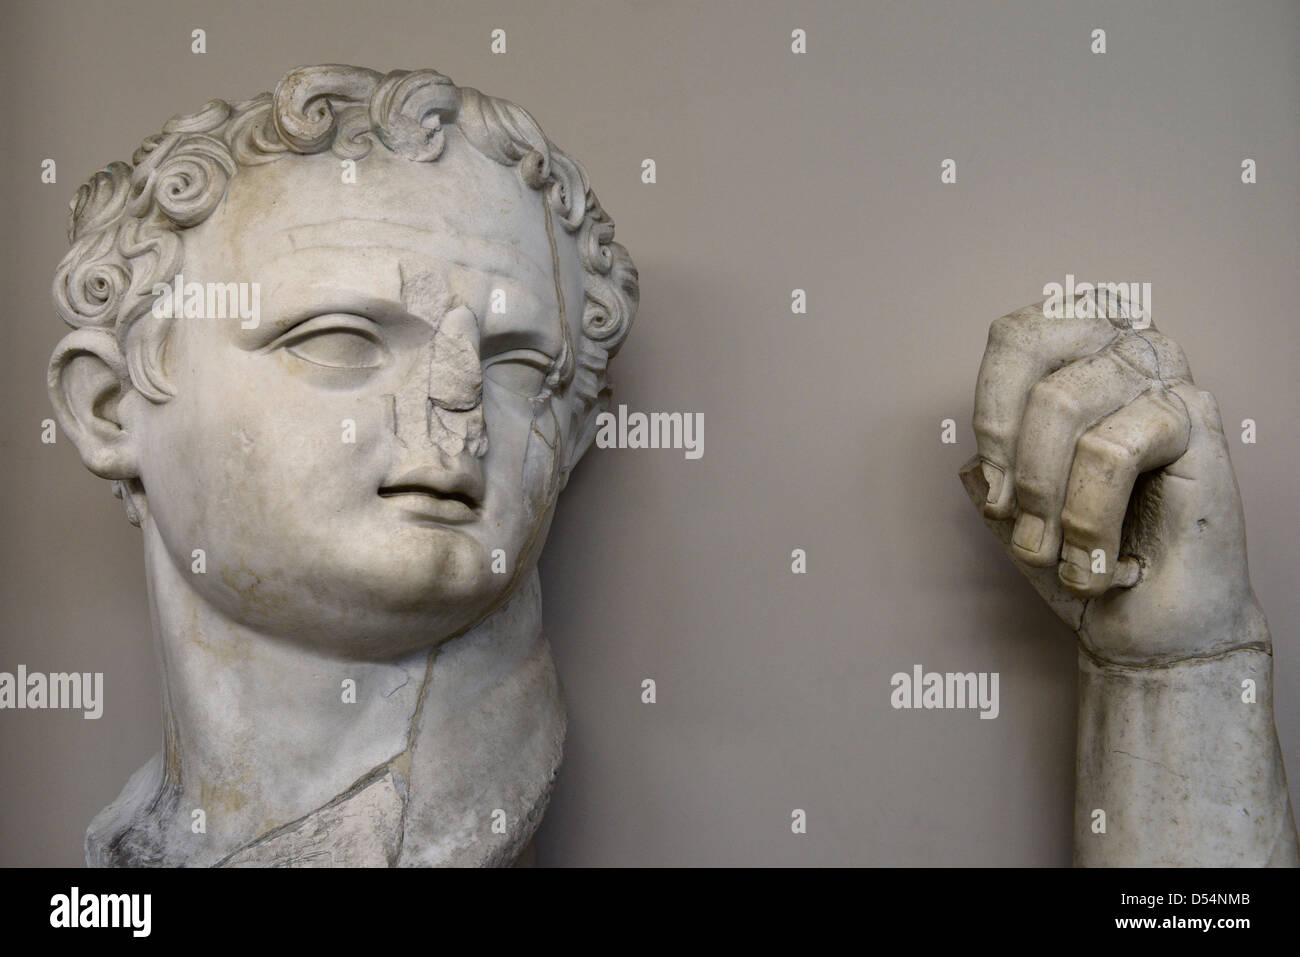 Ruined sculpture of head and hand of brutal tyrant Roman Emperor Domitian at Ephesus Museum Turkey Stock Photo